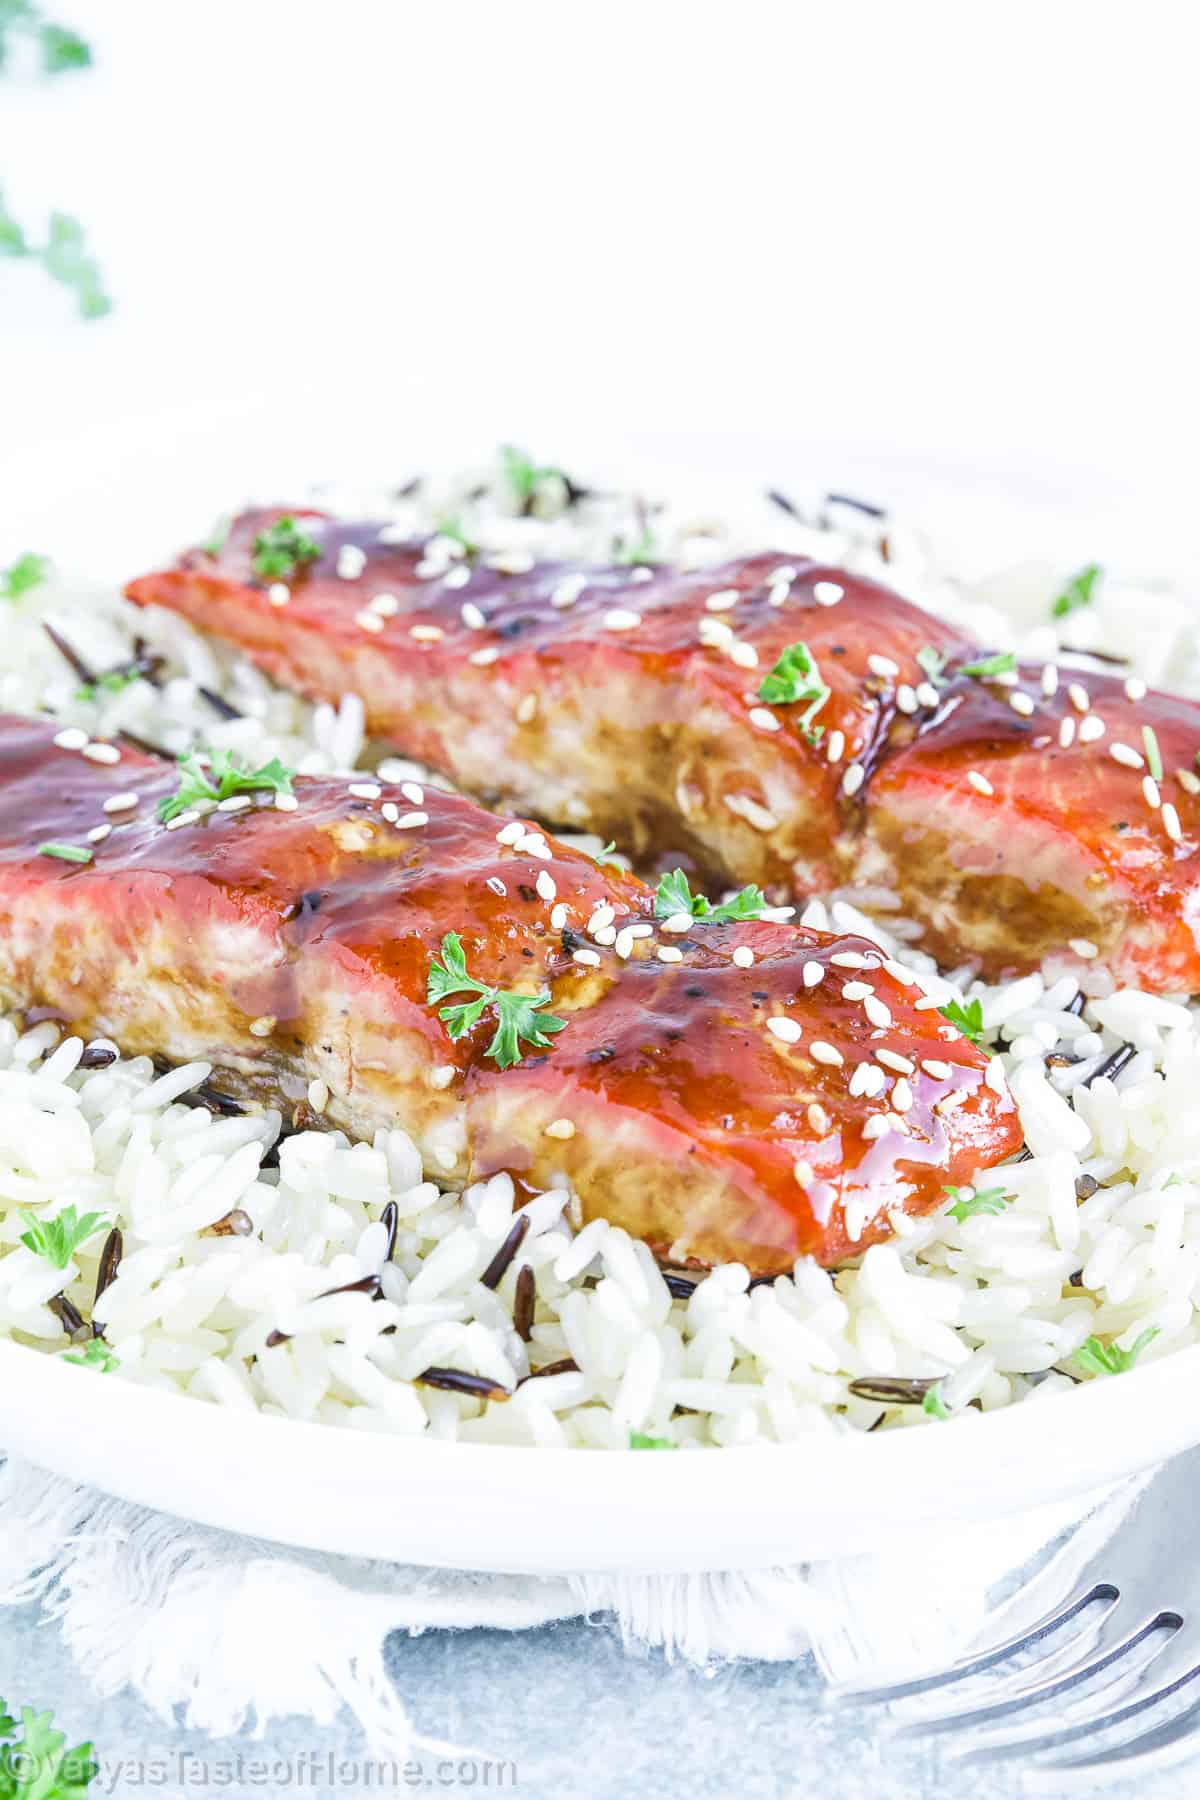 This delicious Teriyaki Salmon recipe is an incredible weeknight dinner option that brings the rich, savory flavors of the East right to your dinner table. 